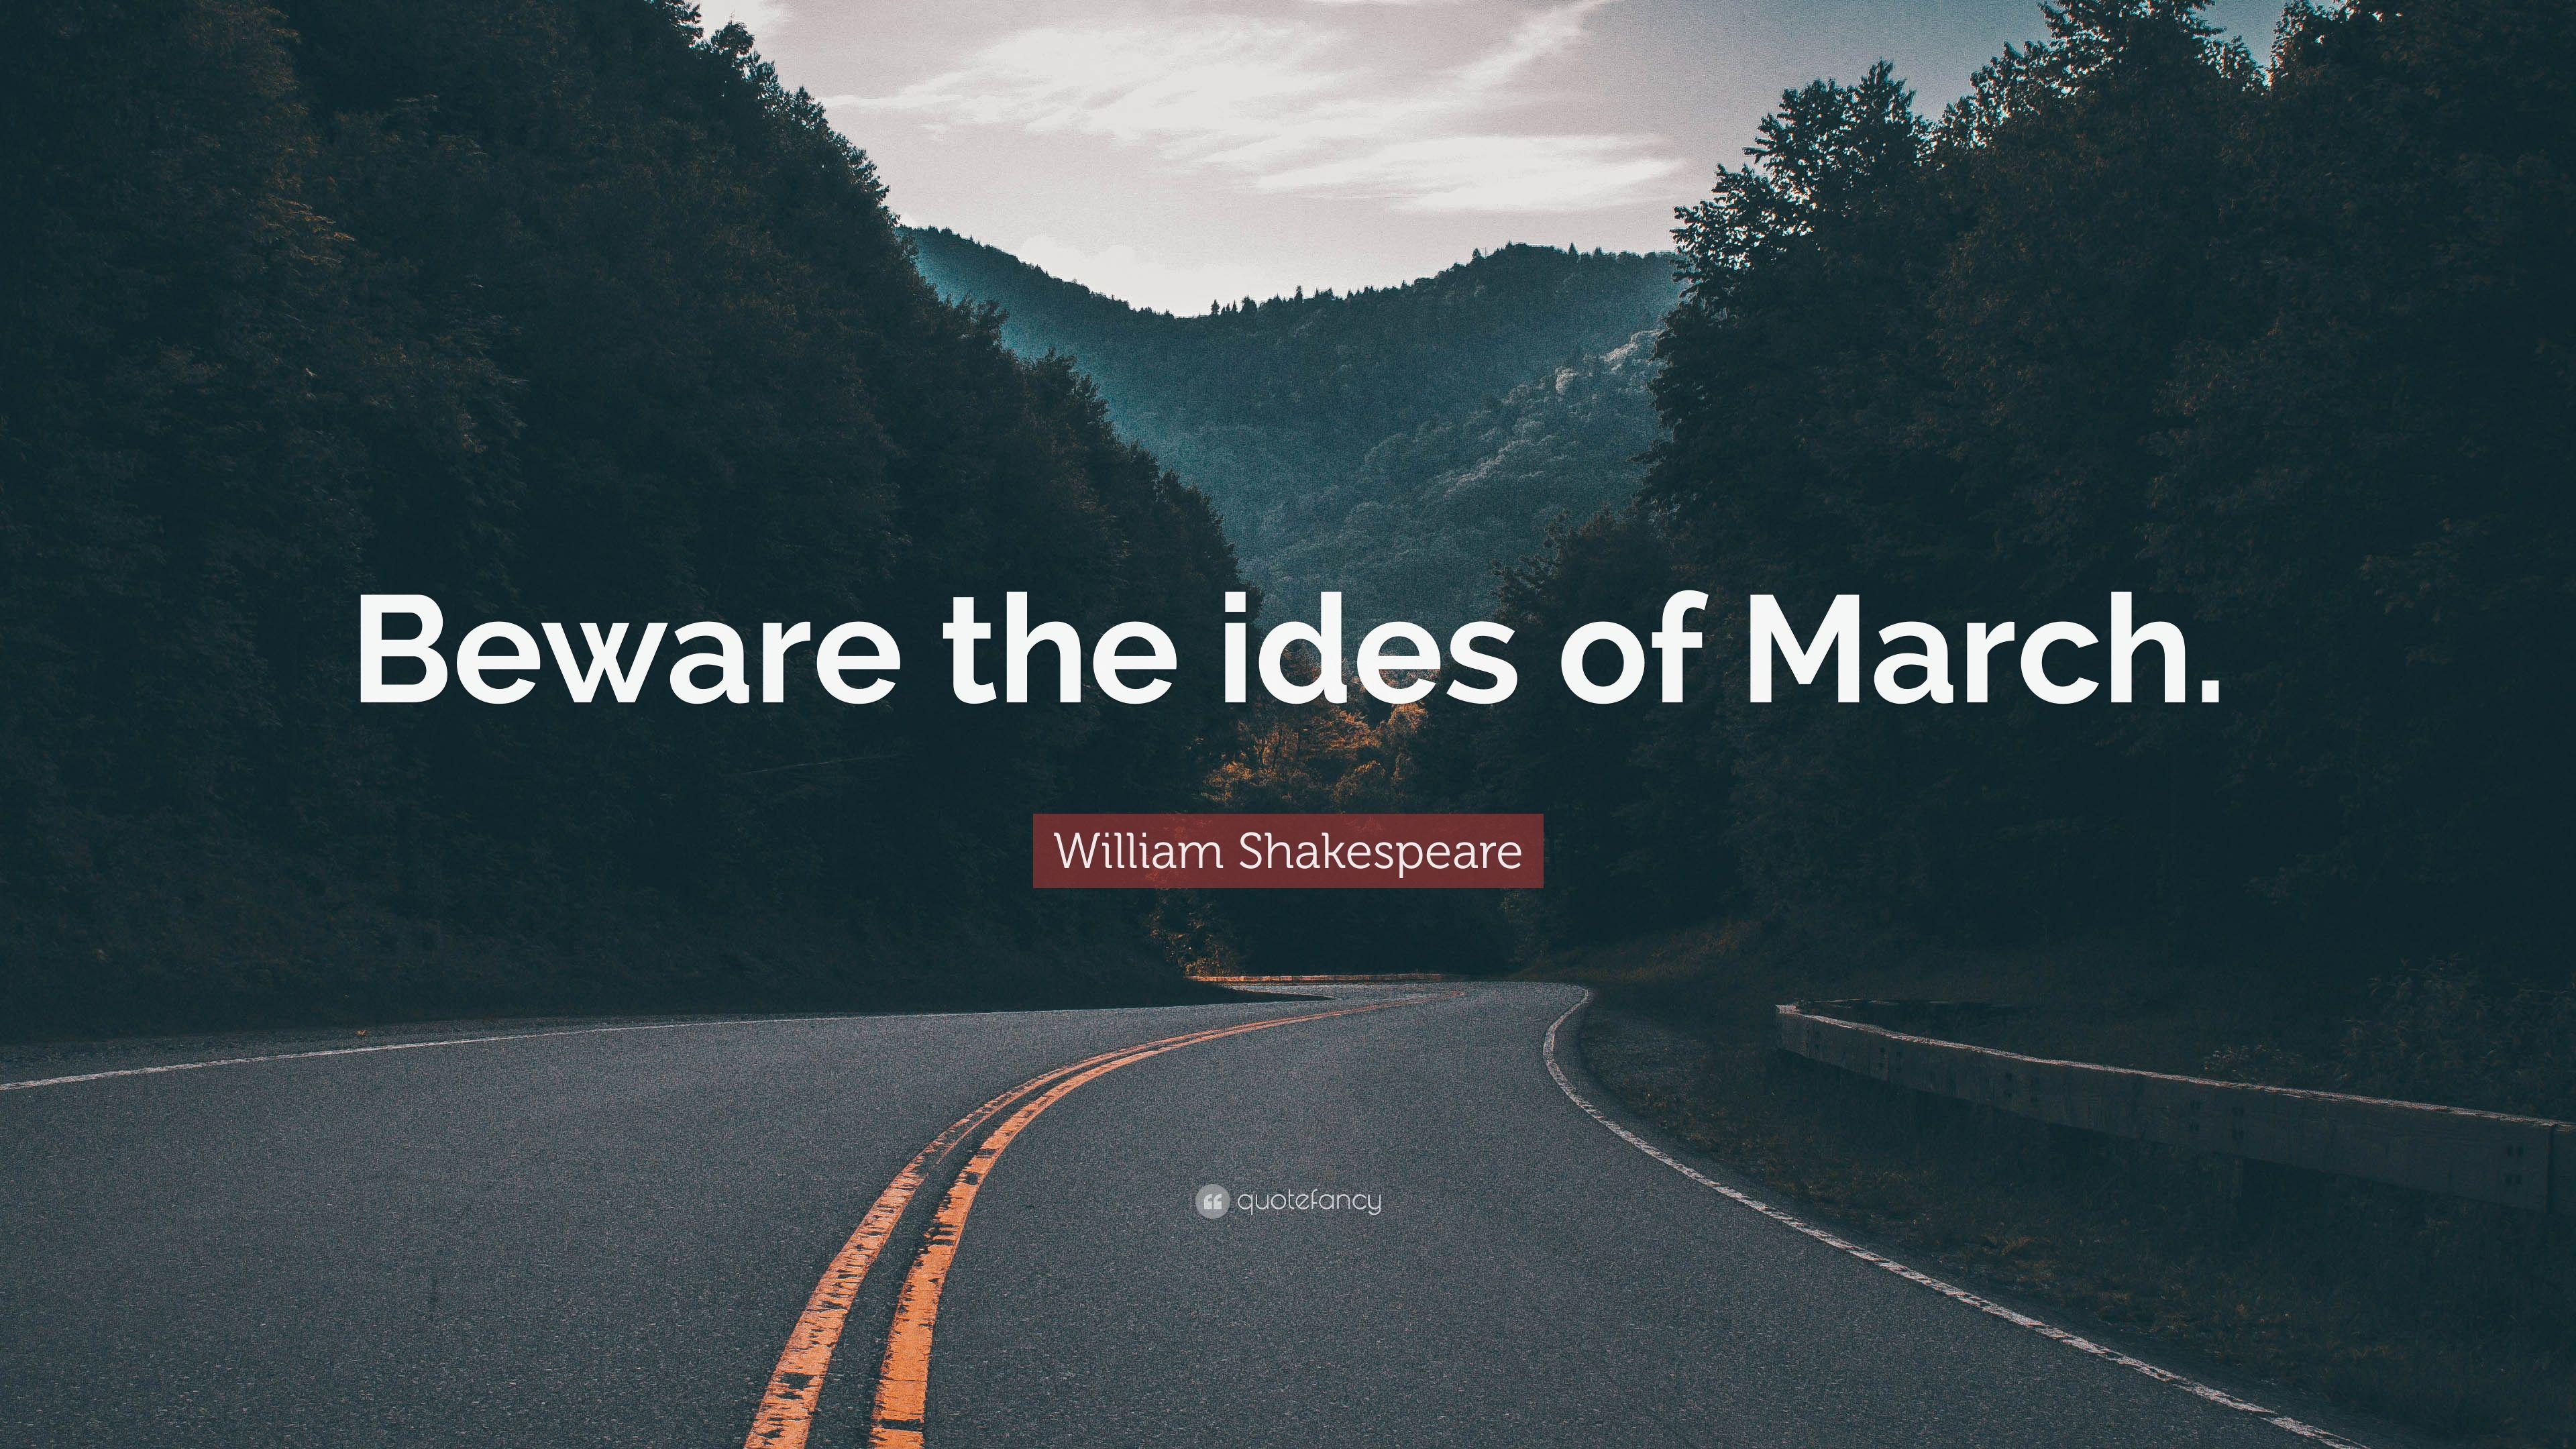 The Ides Of March Wallpapers Wallpaper Cave